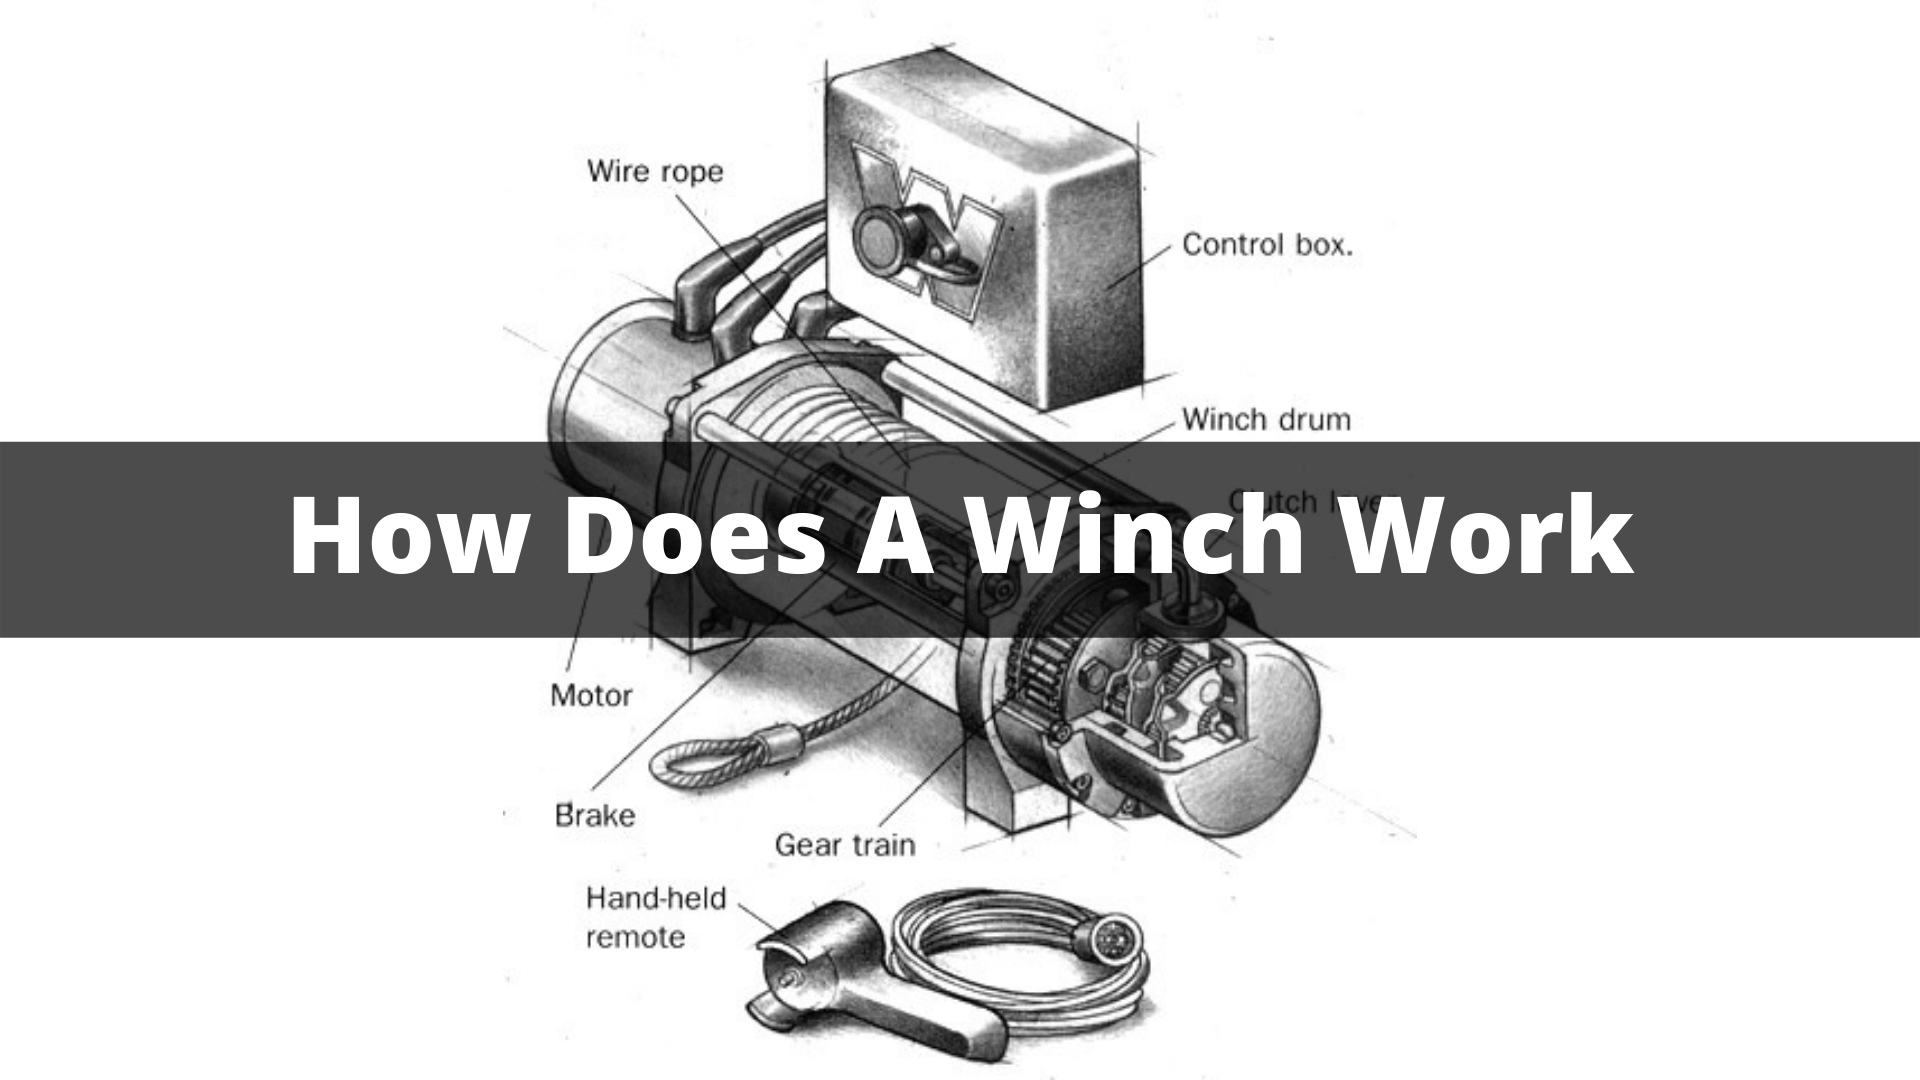 How Does A Winch Work